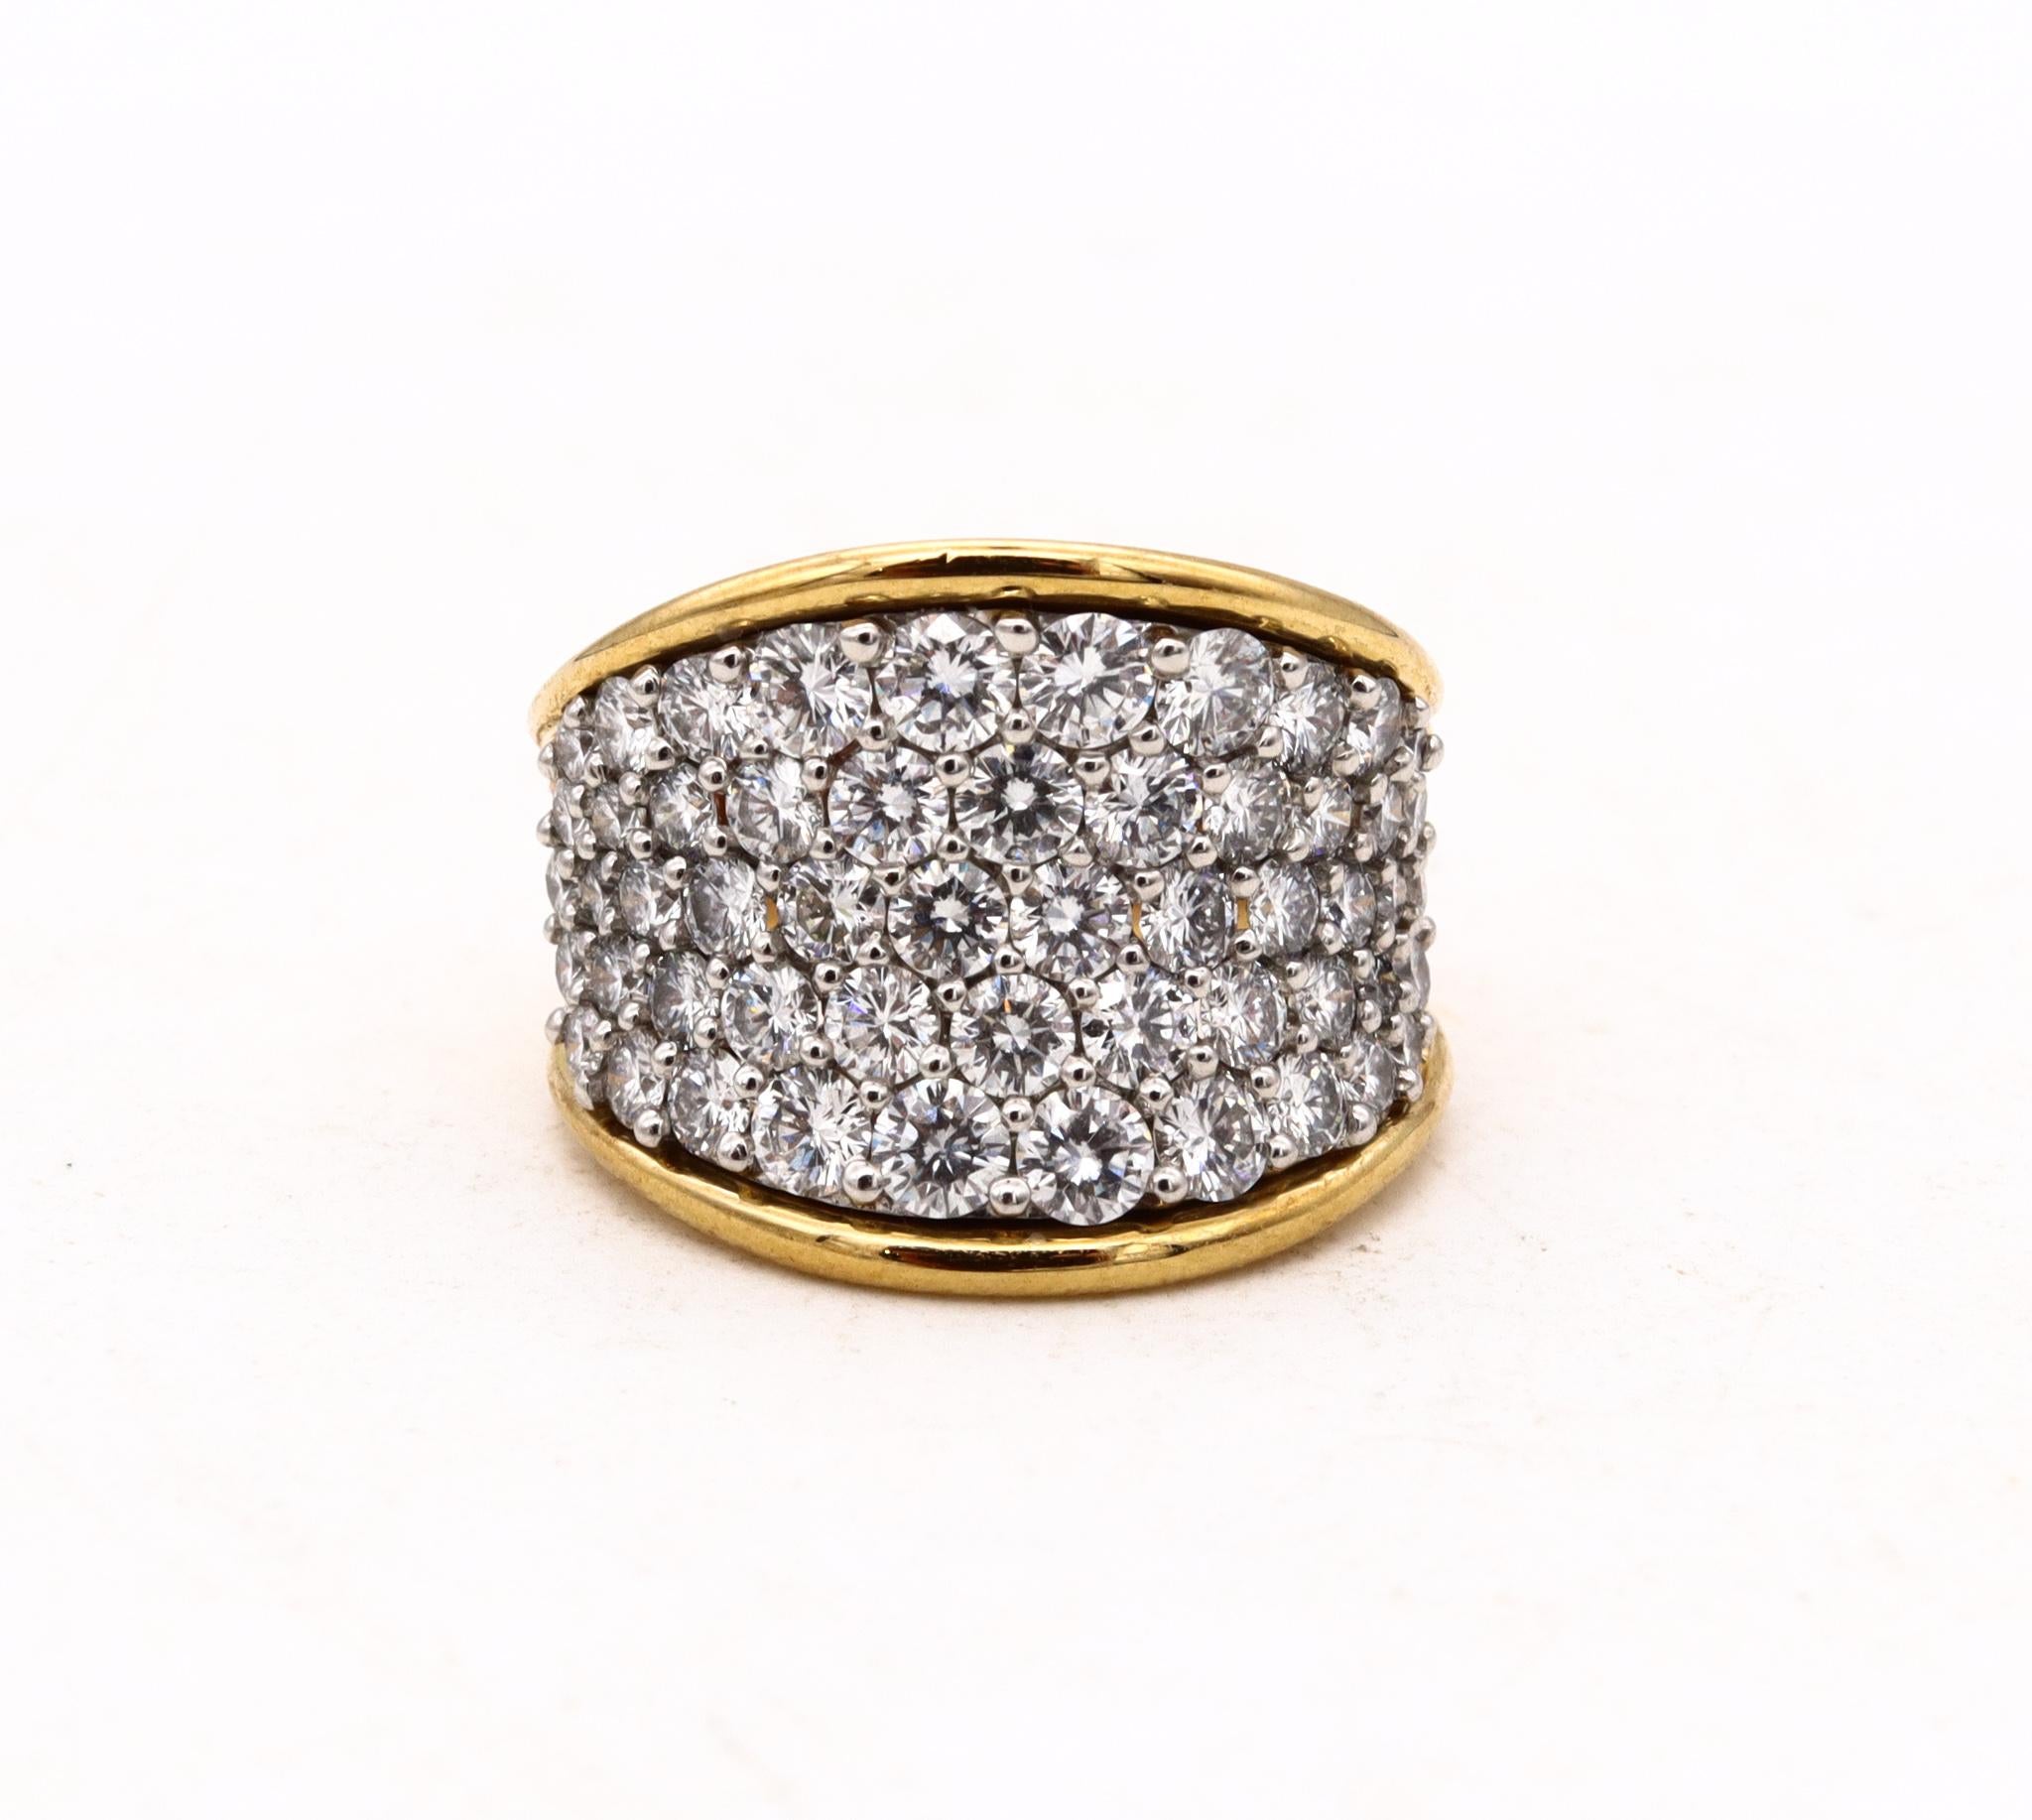 Designer Cluster Ring in Platinum and 18Kt Yellow Gold 3.78 Cts D VS Diamonds For Sale 2